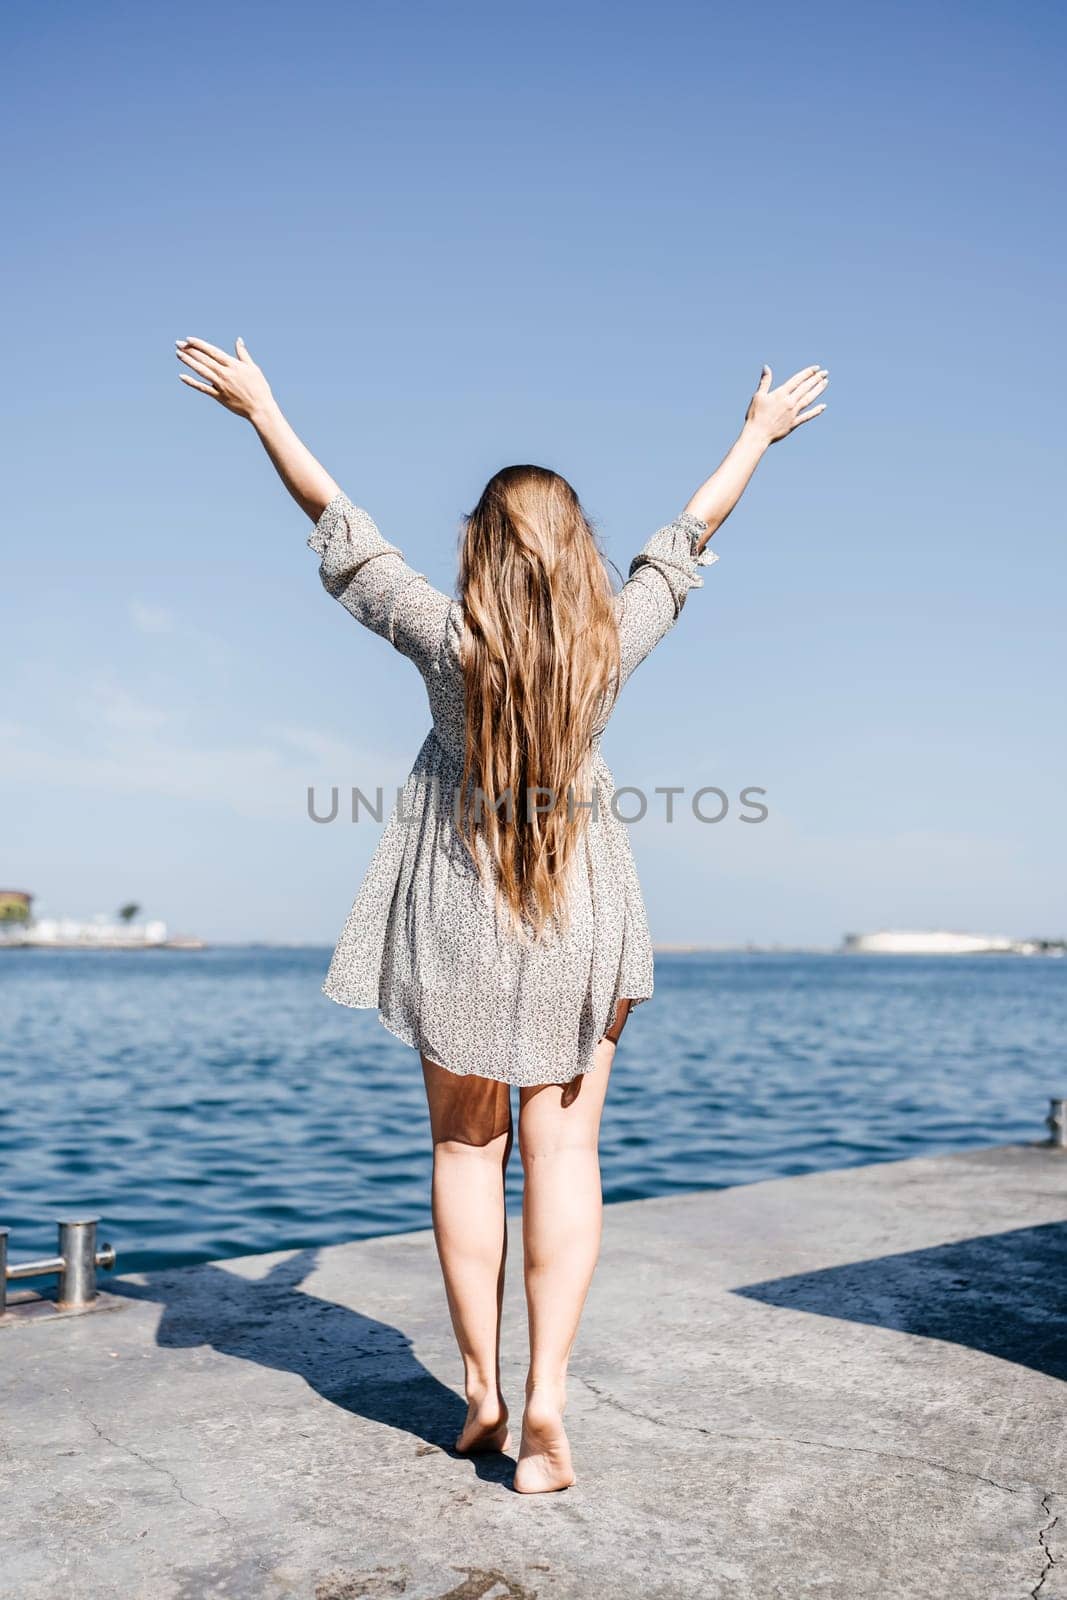 woman in a dress stands on a dock by the water, her arms raised in the air. Concept of freedom and joy, as the woman is celebrating or expressing her happiness. by Matiunina